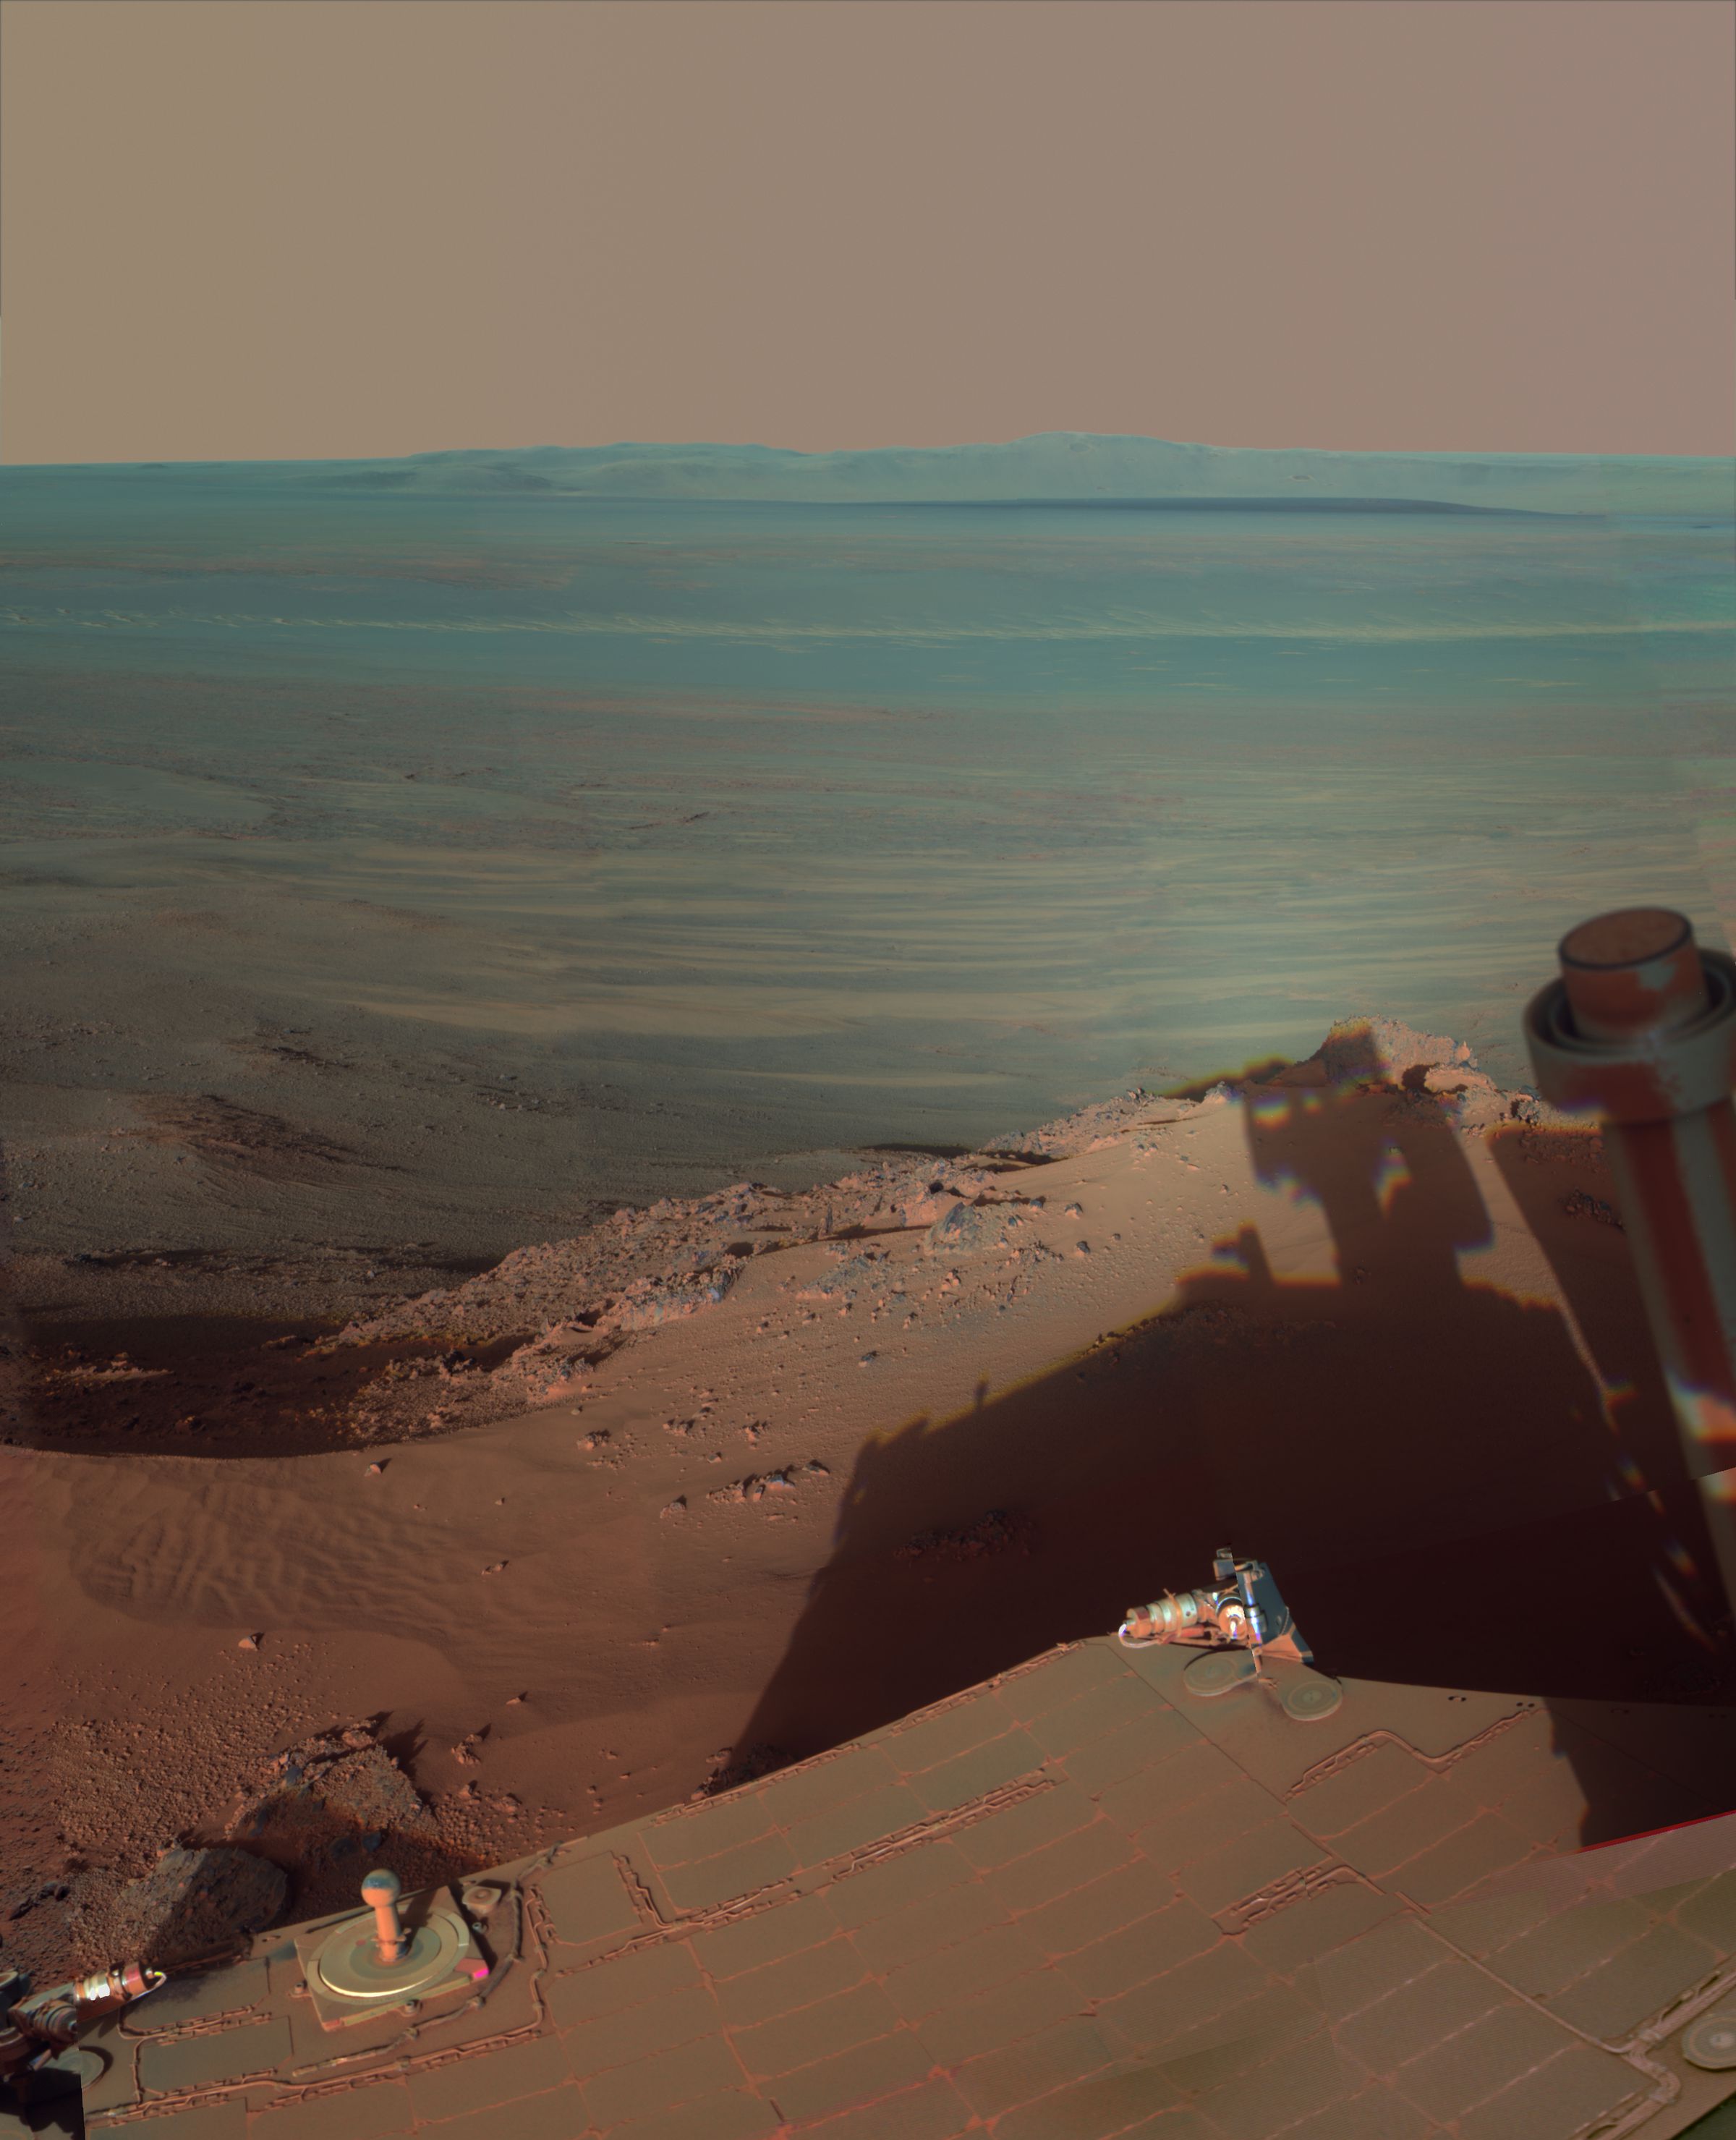 Opportunity captured some stunning landscapes, including this view across Endeavor Crater, taken in 2012. The rover itself is visible in the lower part of the image.